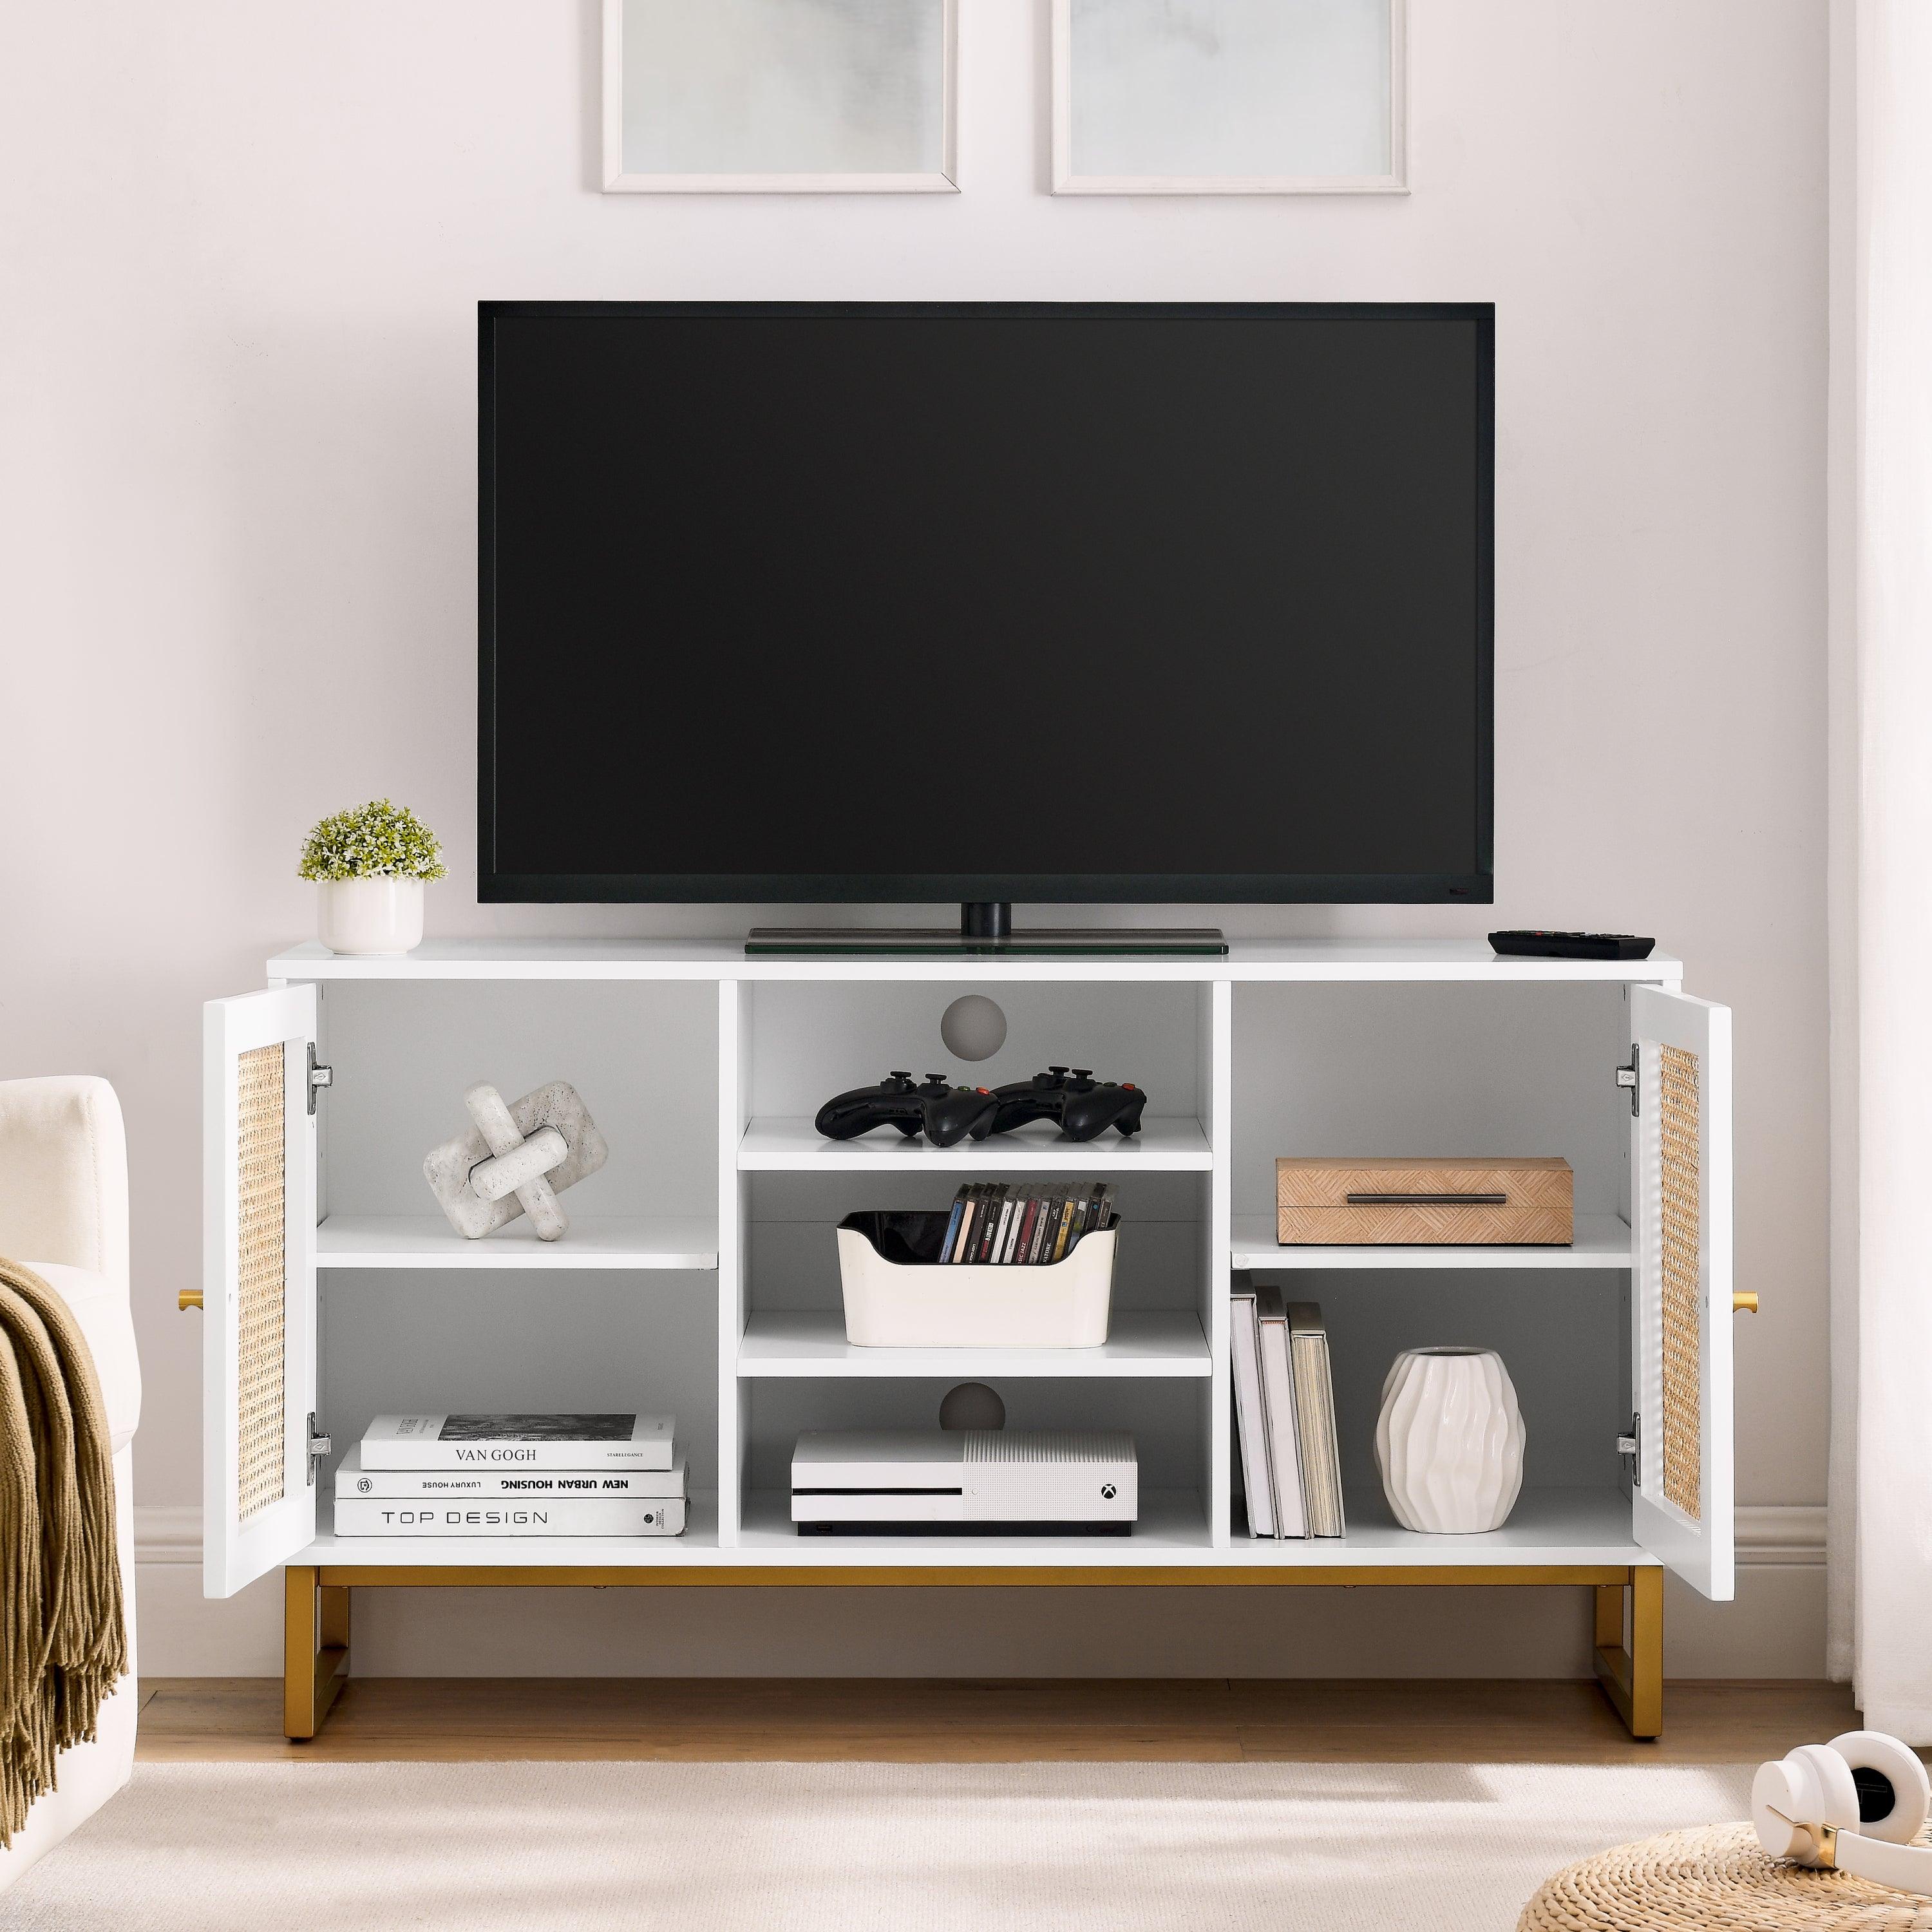 47 Inch Mid Century Modern White TV Stand with Adjustable Shelf, Rattan TV Stands, Entertainment Cabinet, Media Console for Living Room Bedroom Media Room, White Wood Finish & Metal Legs LamCham